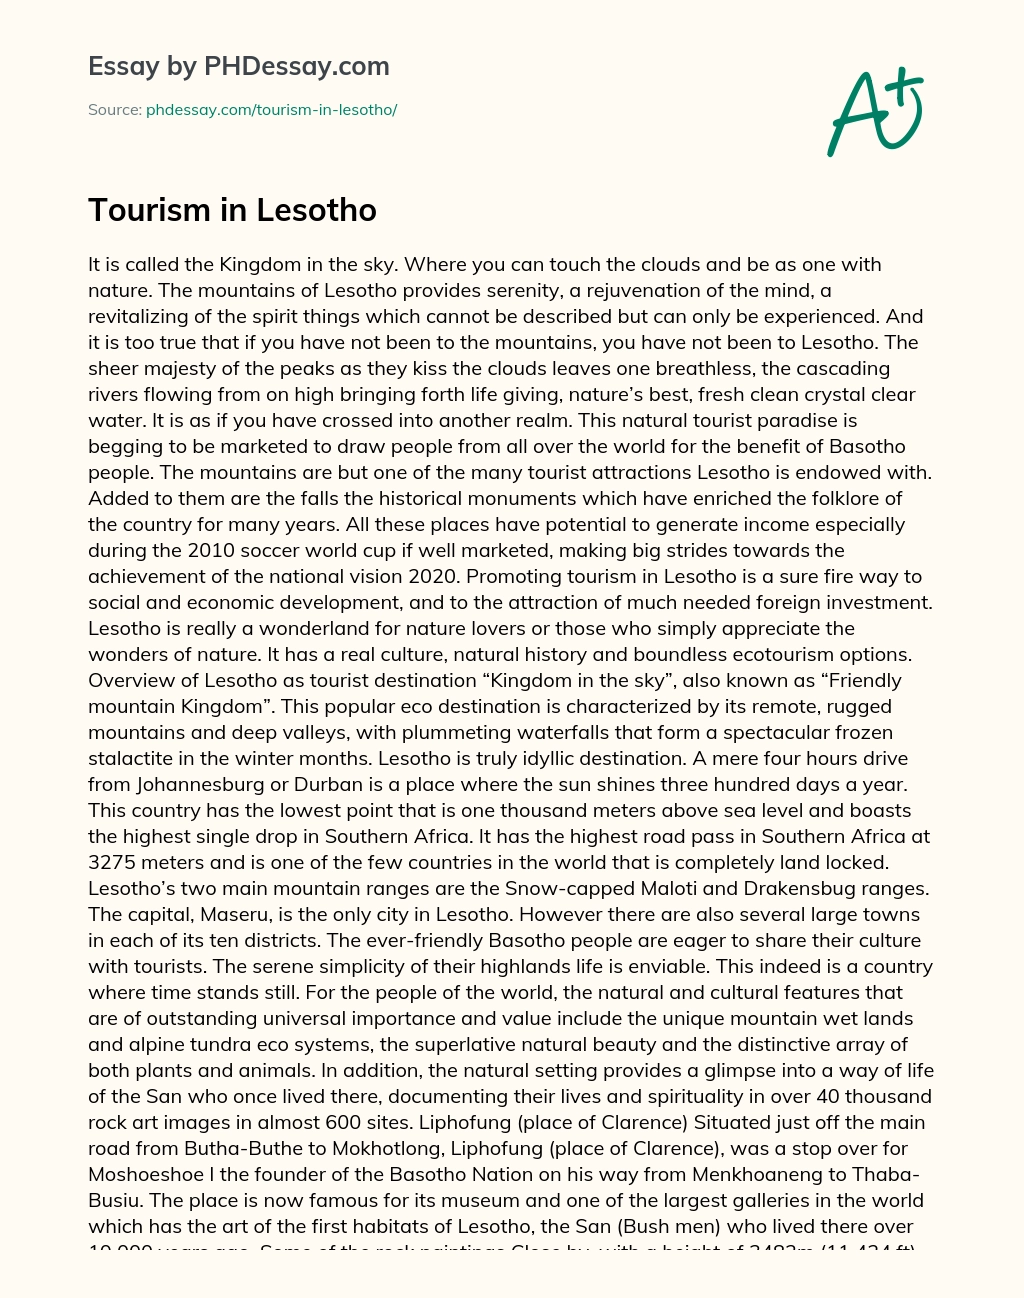 Tourism in Lesotho essay